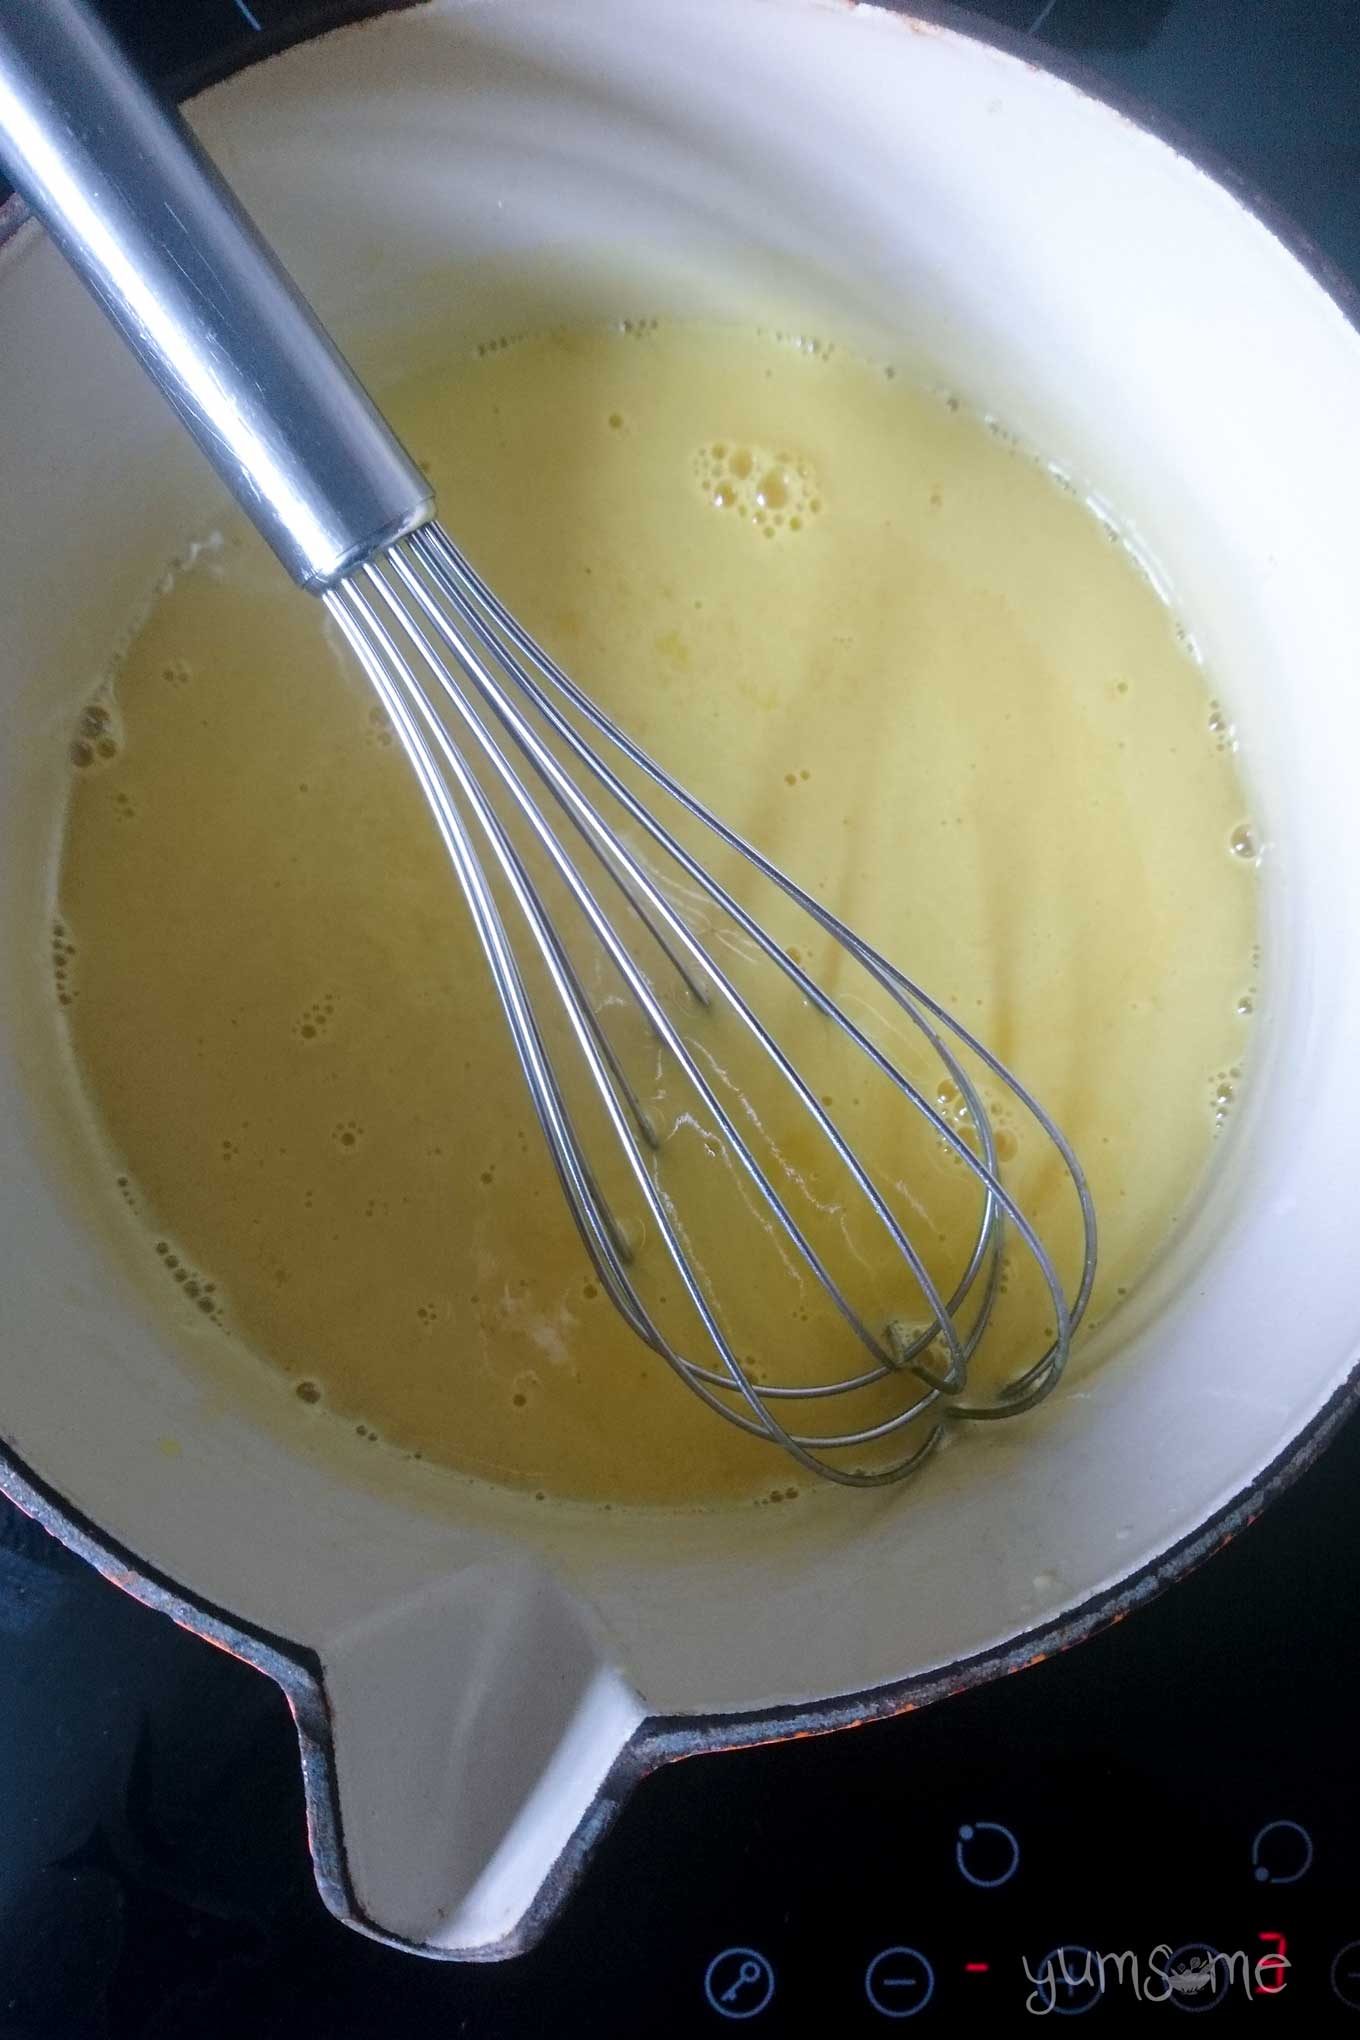 Thin lemon curd slurry in a pan, with a whisk, before cooking.